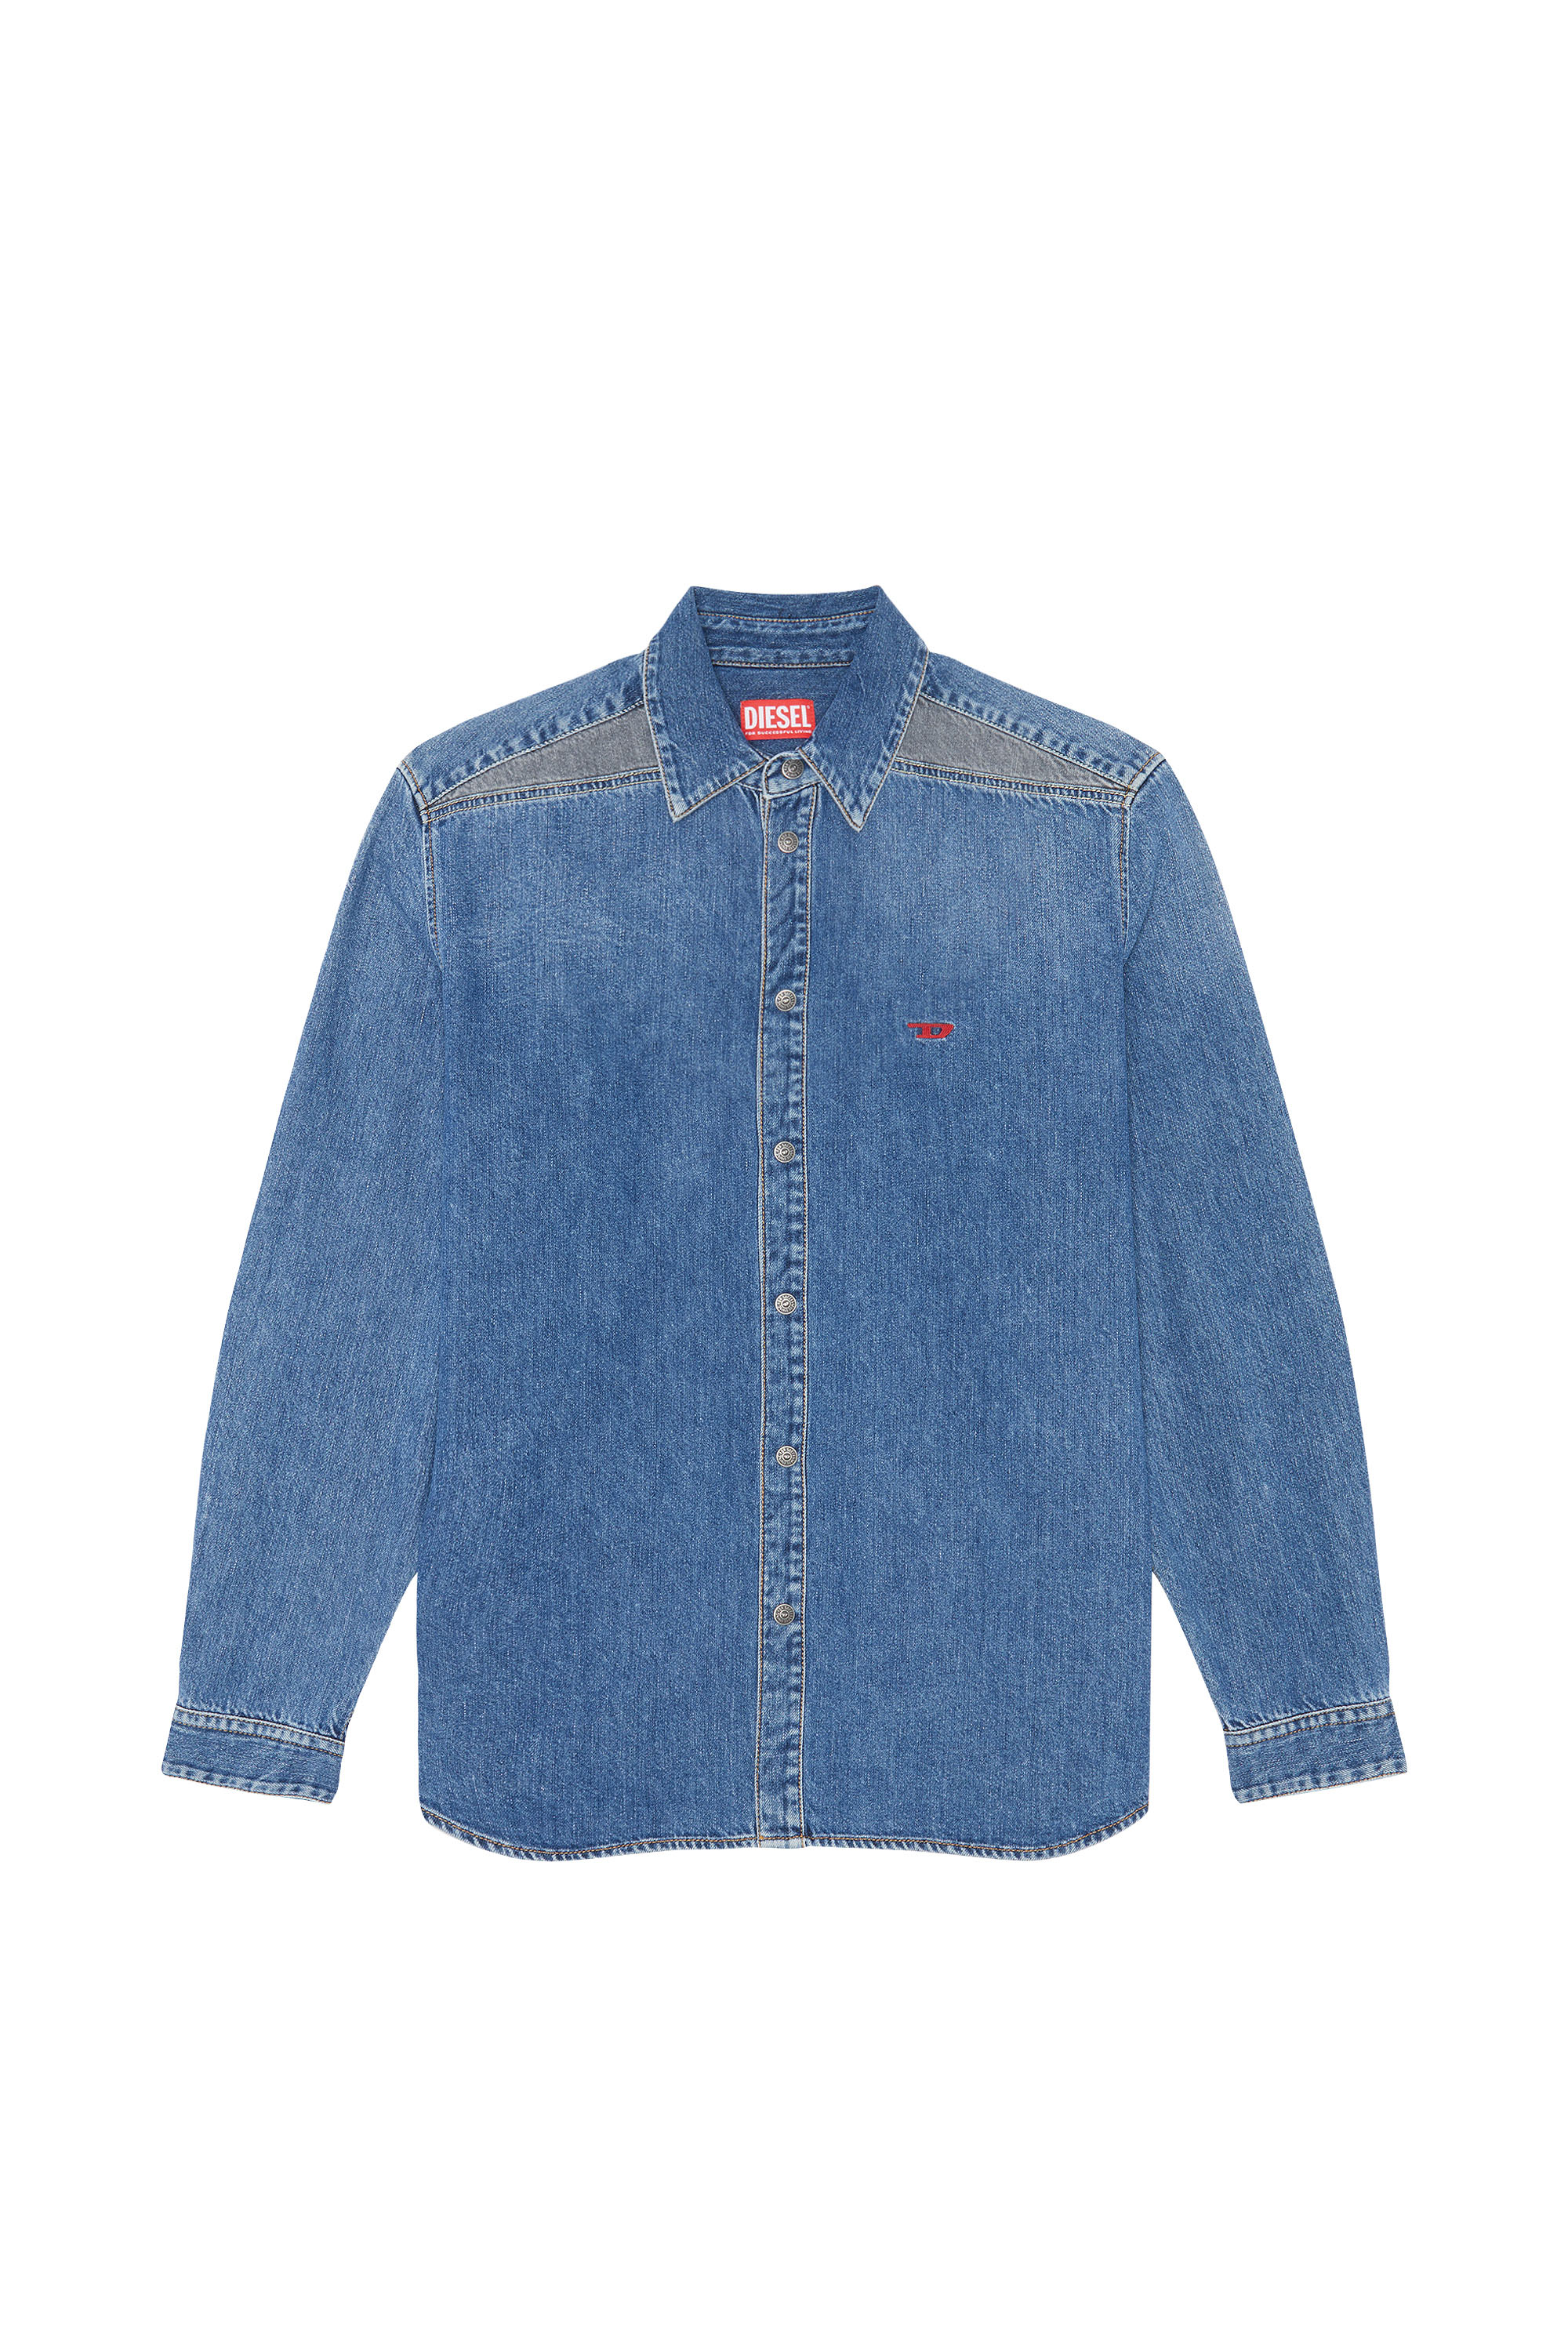 Diesel - D-SIMPLY-RS, Man Denim shirt with contrast inserts in Blue - Image 6